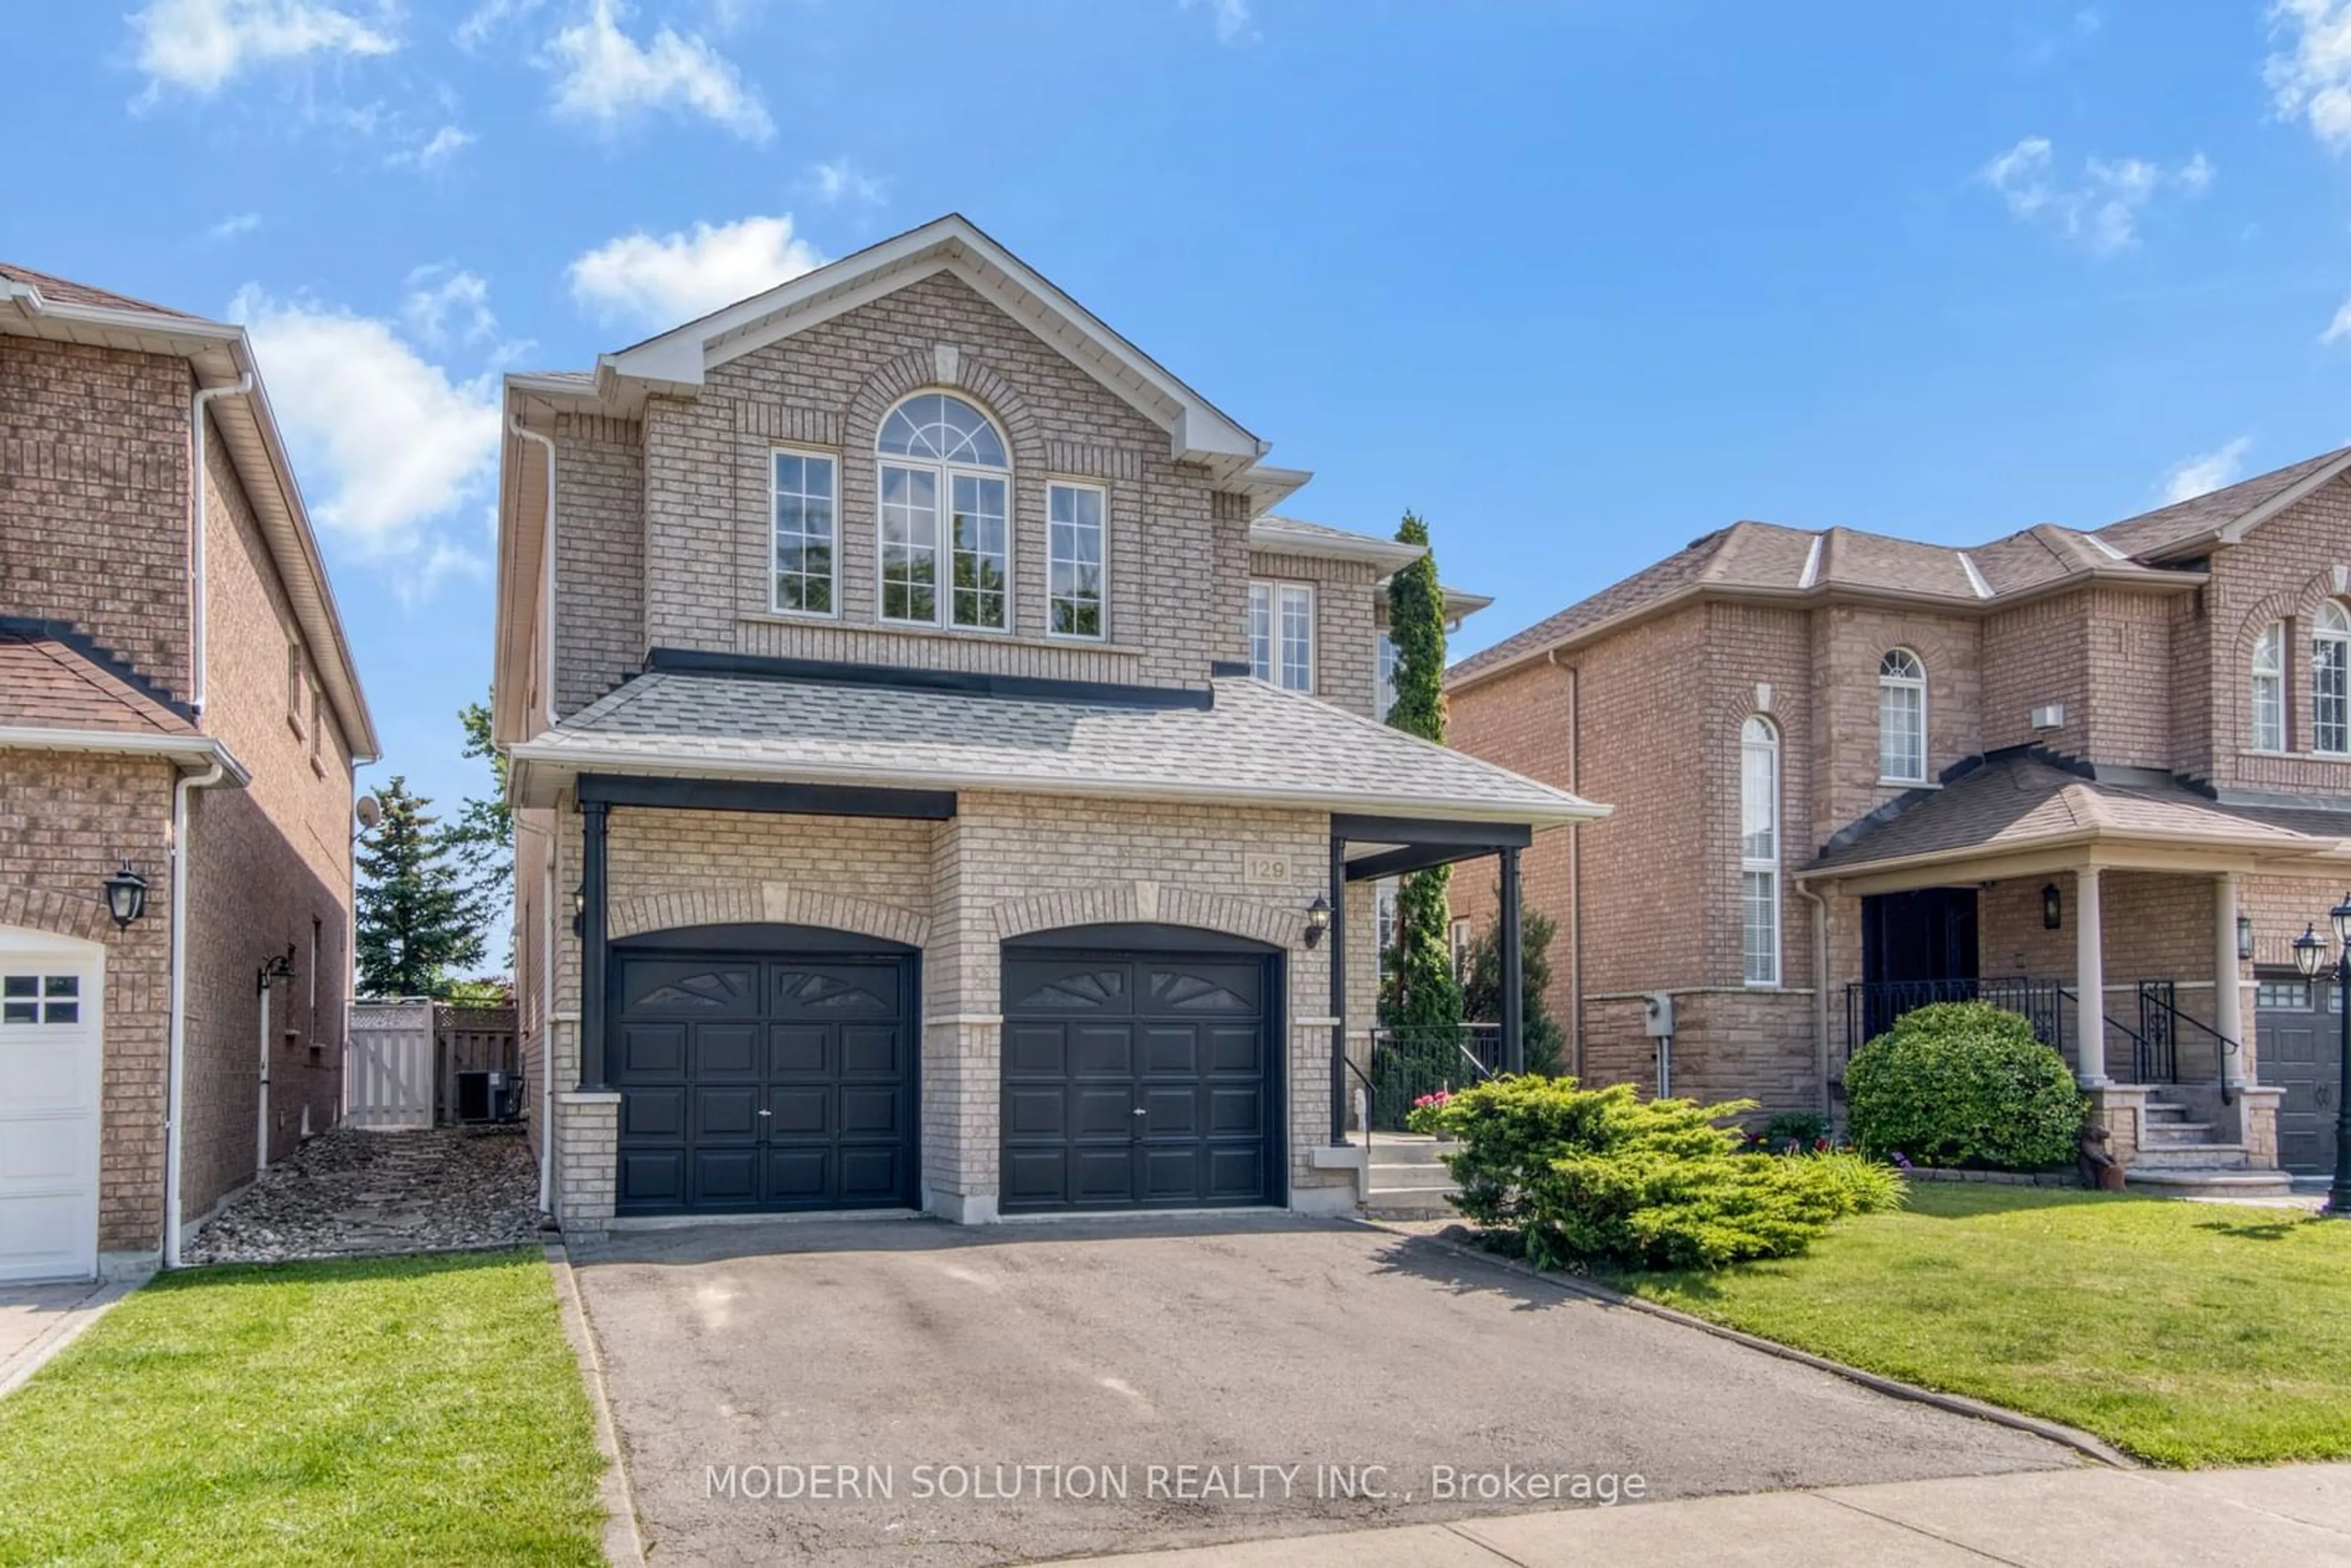 Home with brick exterior material for 129 Sonoma Blvd, Vaughan Ontario L4H 1N8